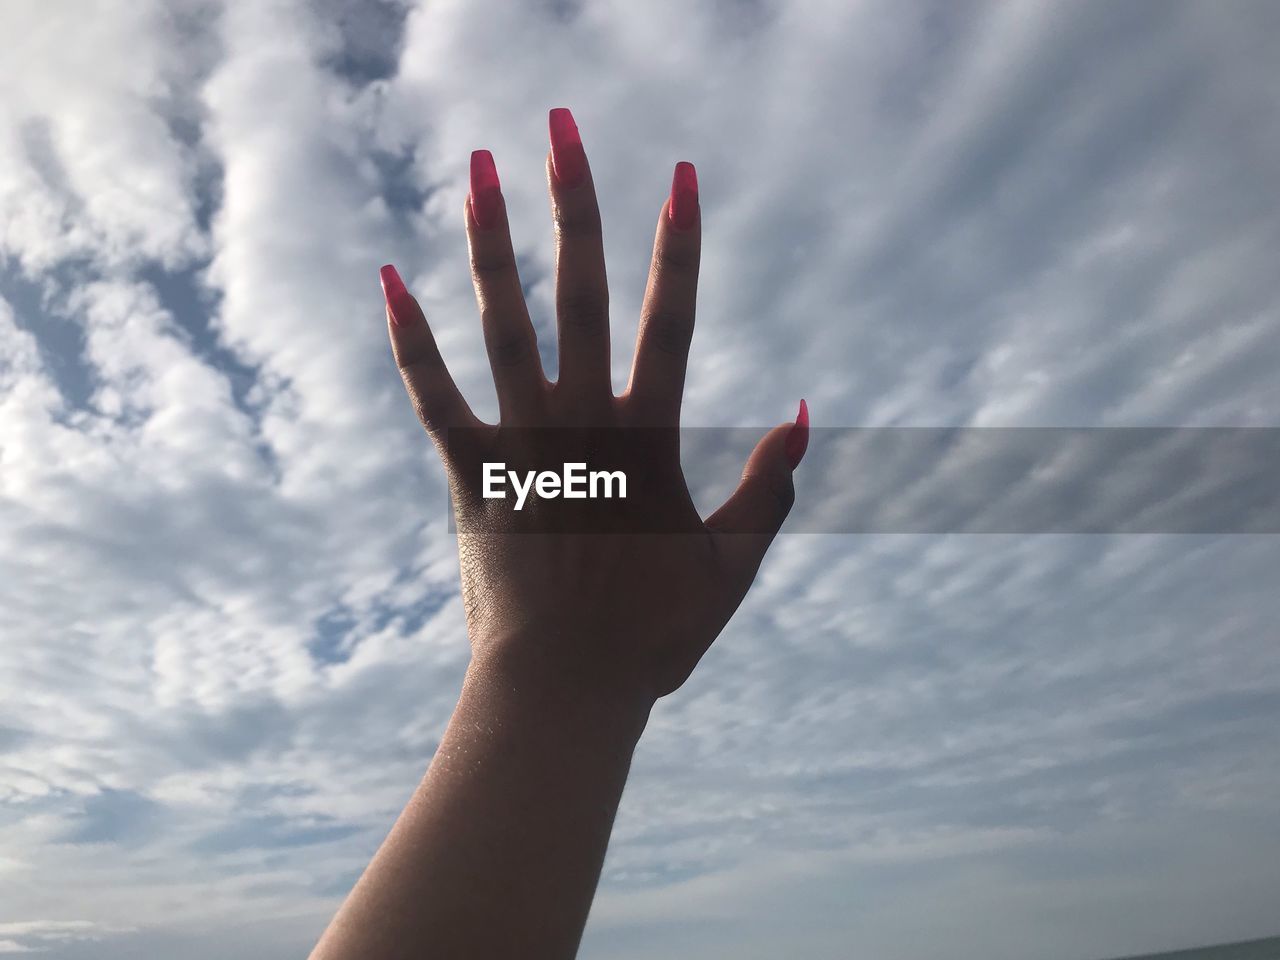 PERSON HAND AGAINST SKY